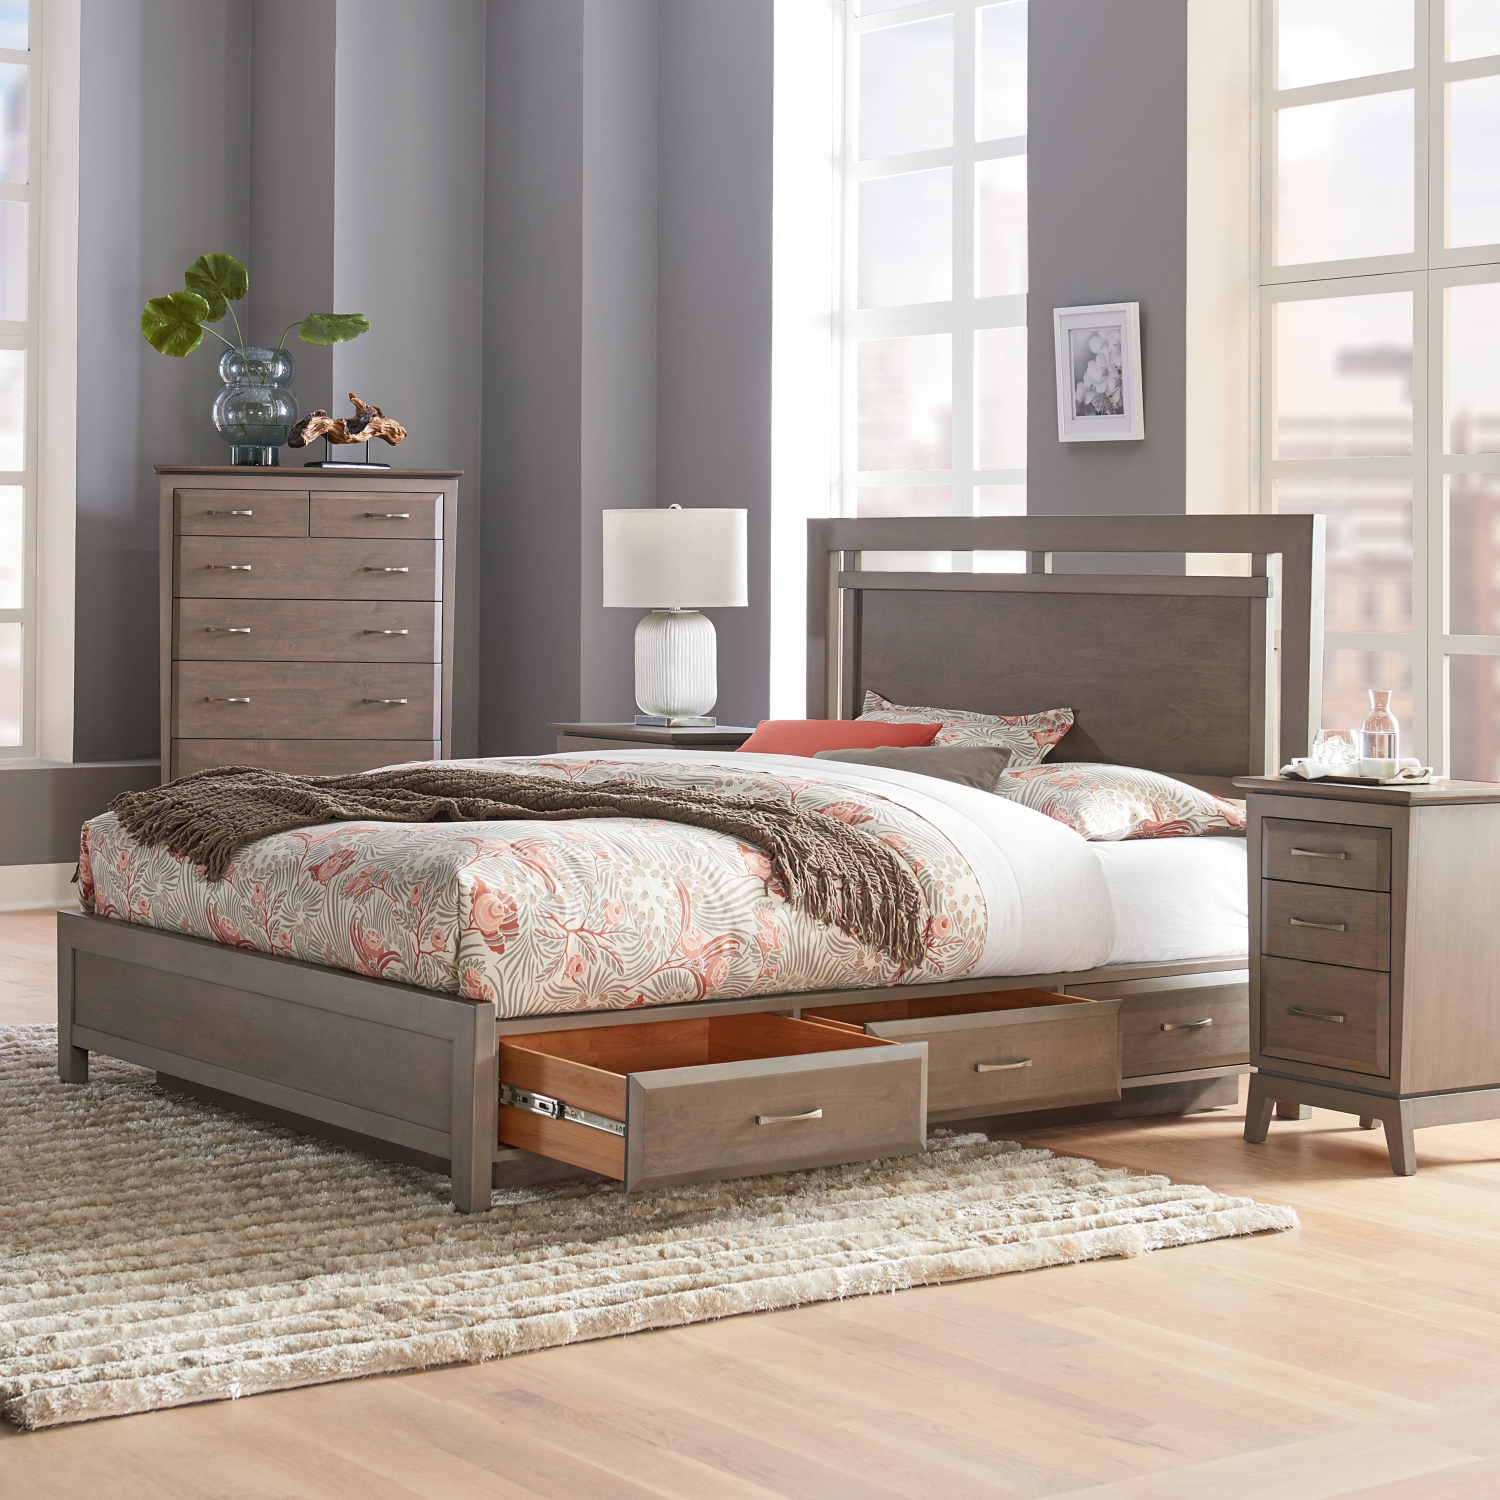 Ellison Panel Storage Bed Queen Lifestyle Image with Drawers Pulled Out